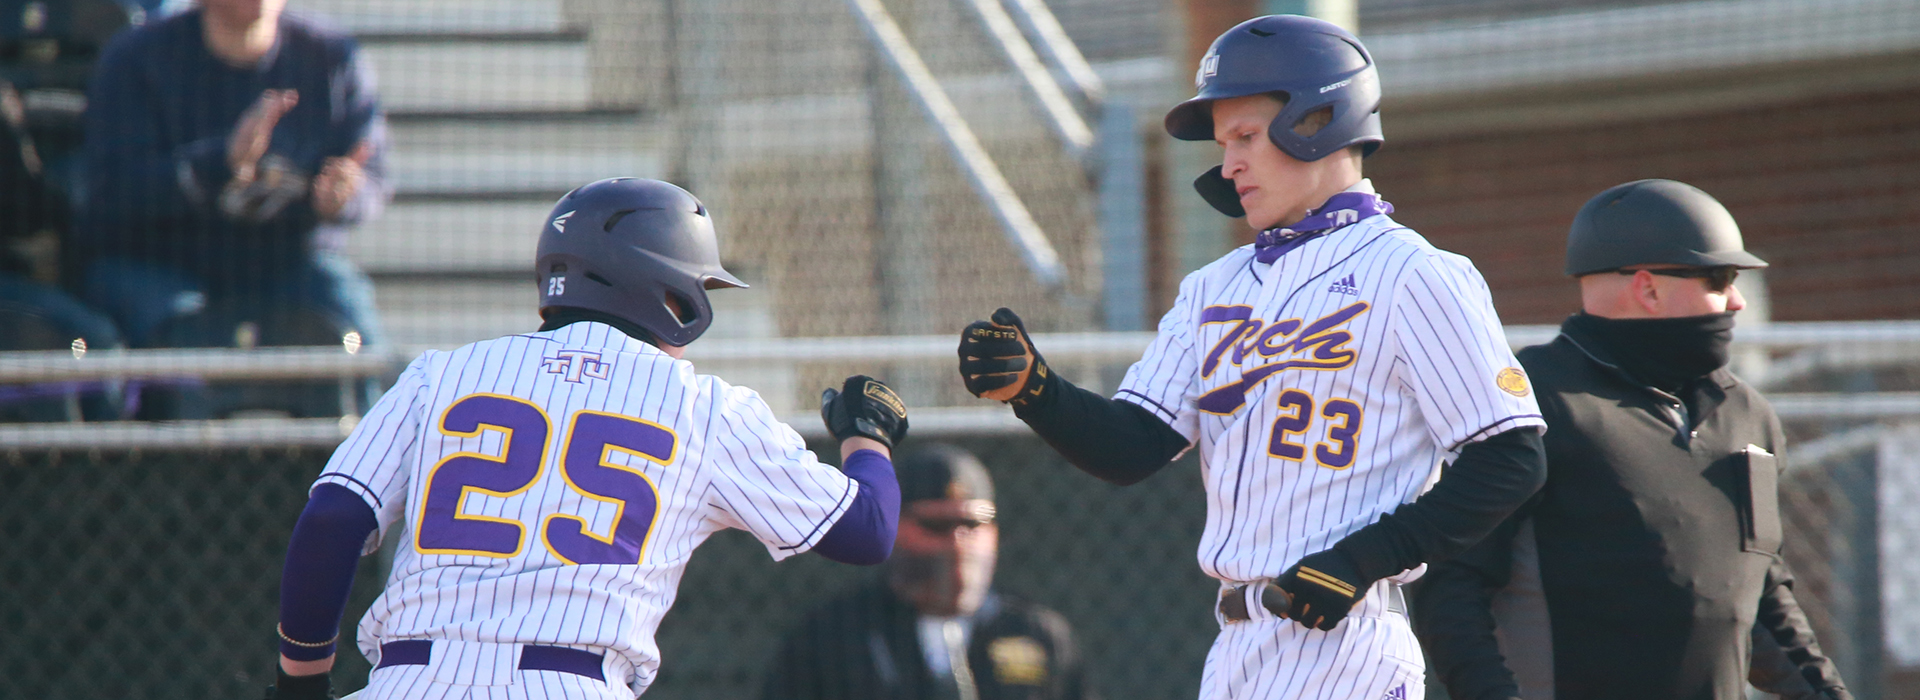 Golden Eagles earn split in Friday doubleheader with Murray State